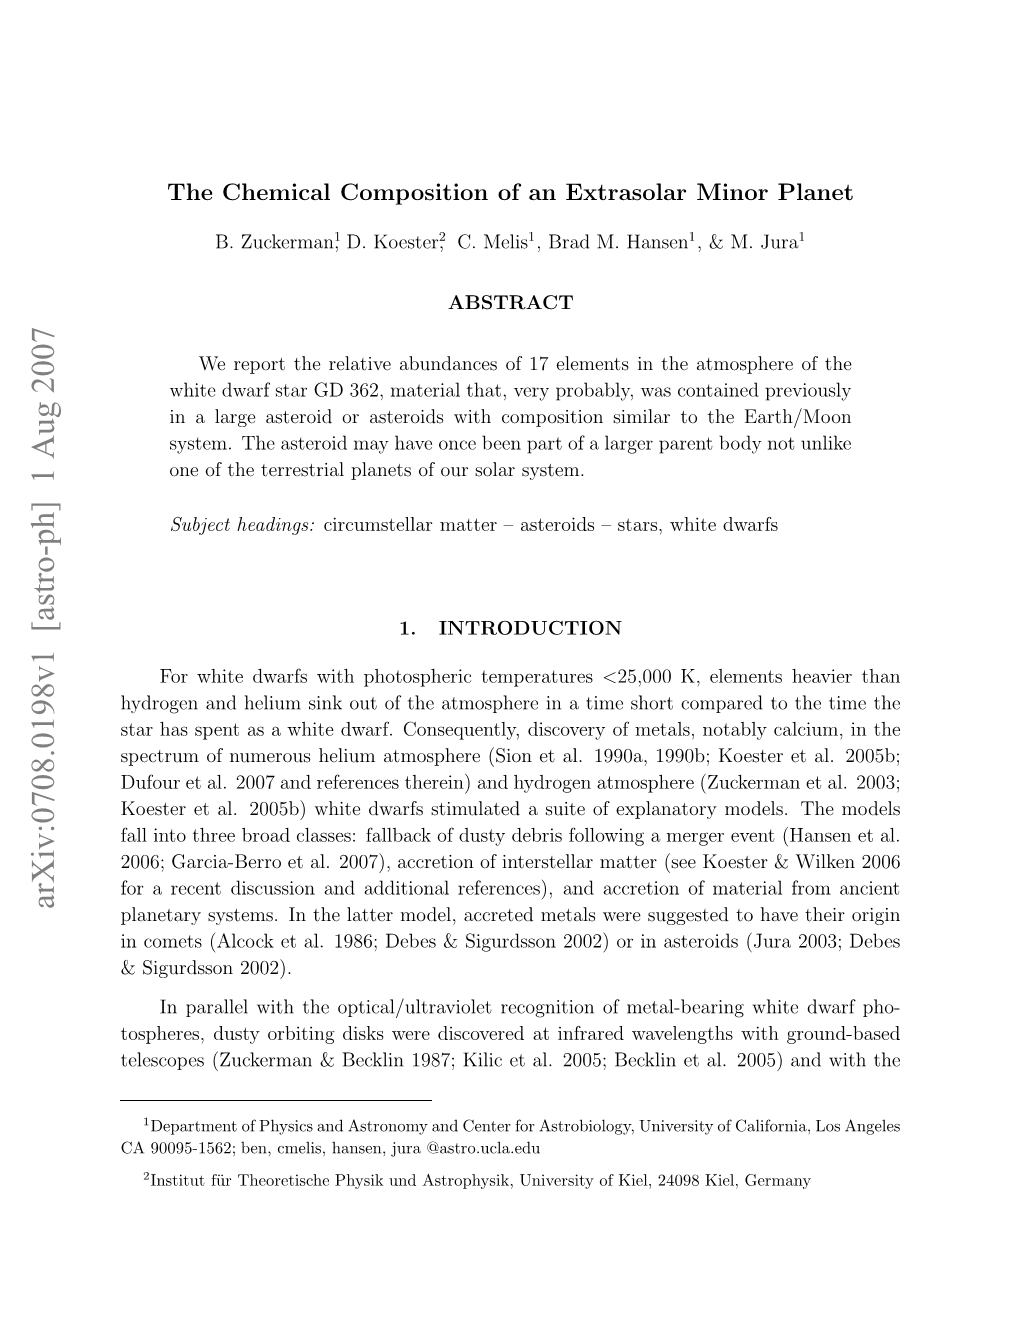 The Chemical Composition of an Extrasolar Minor Planet